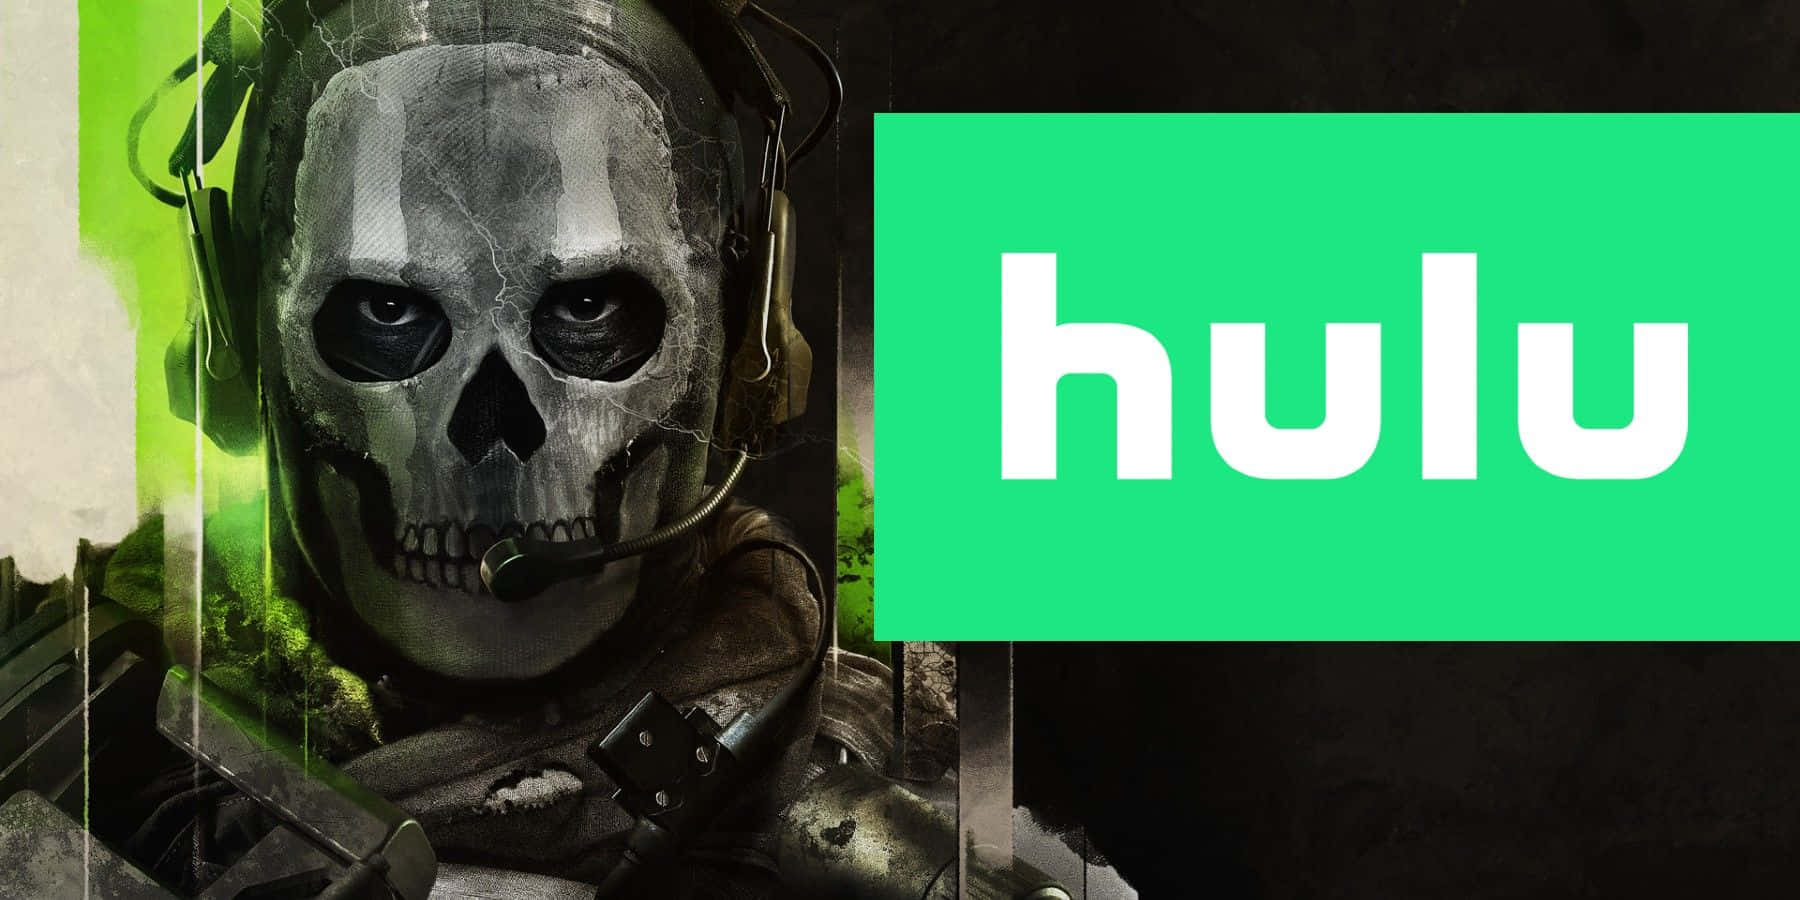 Stream Hulu on your favorite device